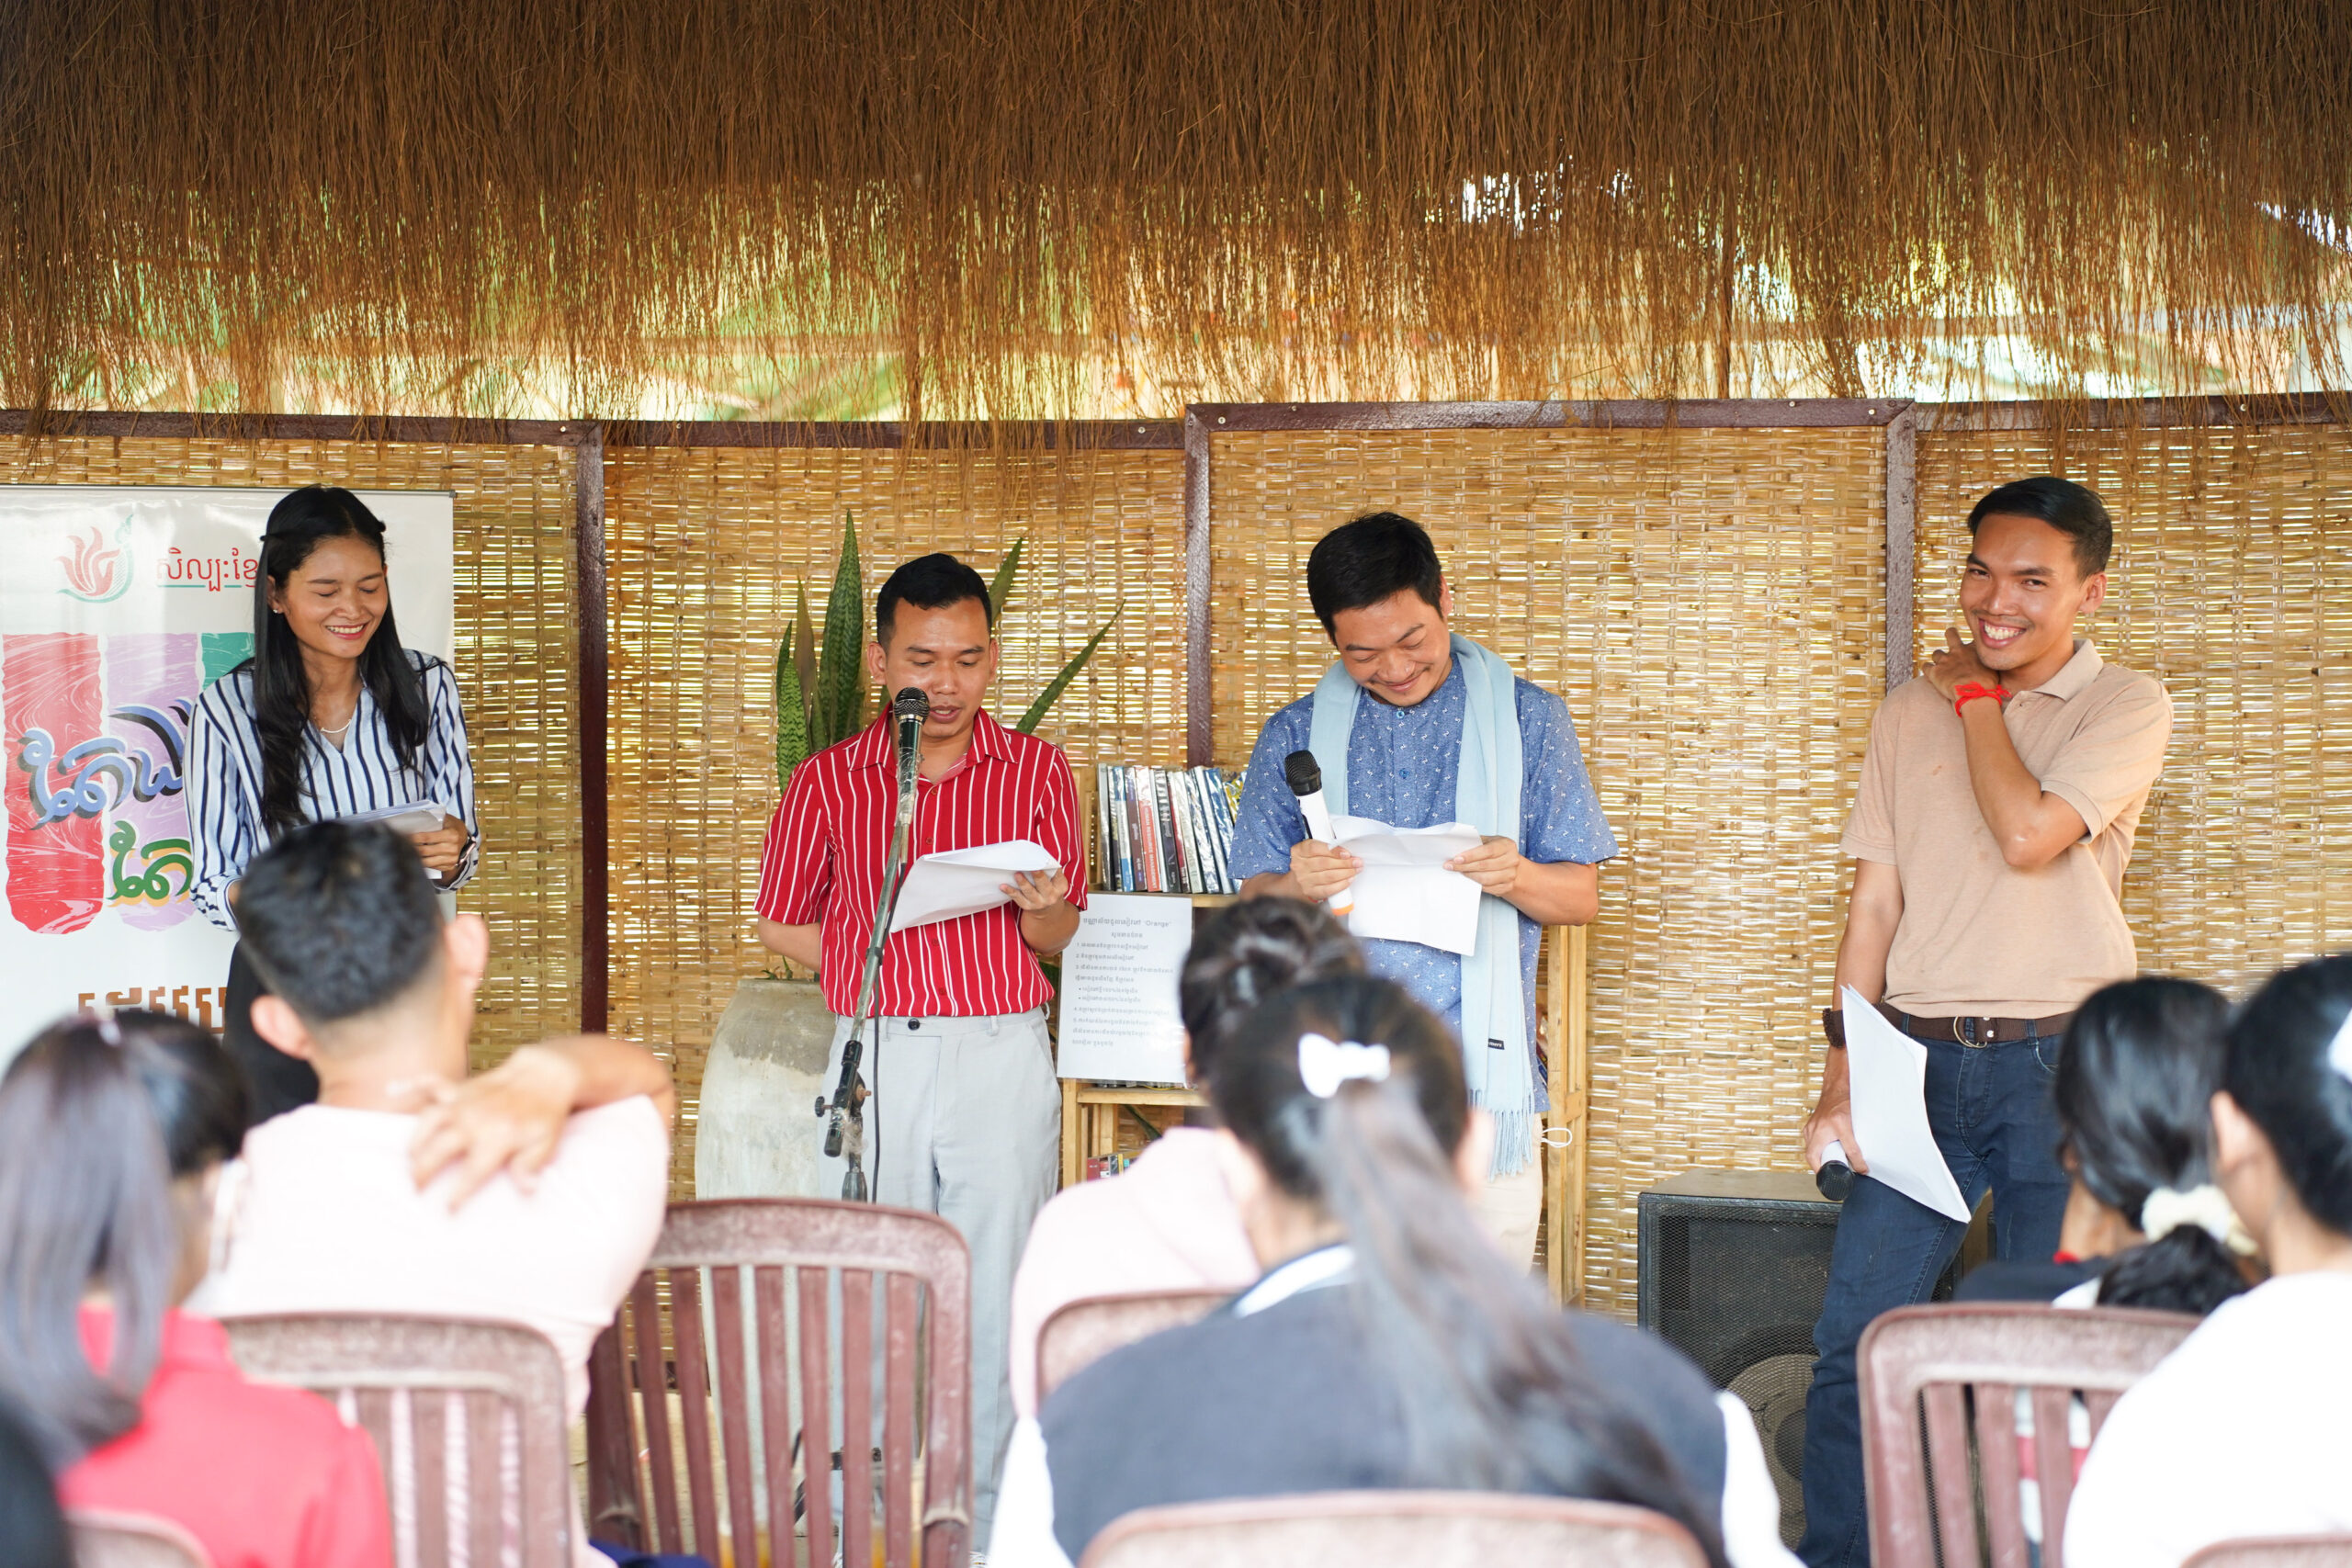 March 26-27, Kampong Thom_Literature reading “CREATIVE WRITING”